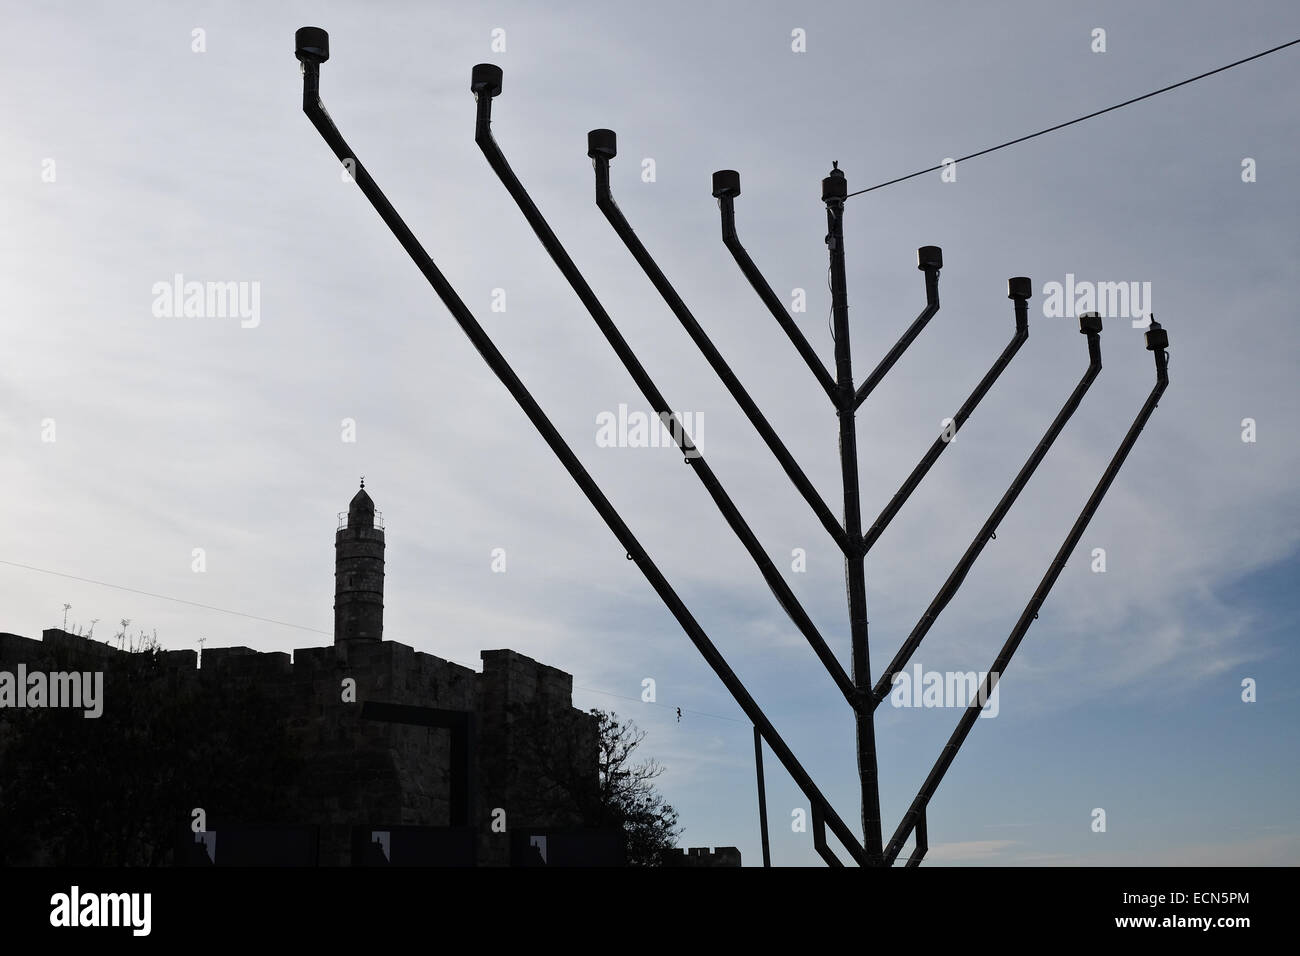 A 'chanukkiah', an eight-branched menorah or candelabrum, is set below the early Muslim period round tower, known as the Tower of David, in preparation for Hanukkah, a Jewish festival commemorating the 164 BCE rededication of the Second Temple in Jerusalem after its desecration by the ruling Seleucid (Syrian Greek) Kingdom, under Antiochus IV. Stock Photo